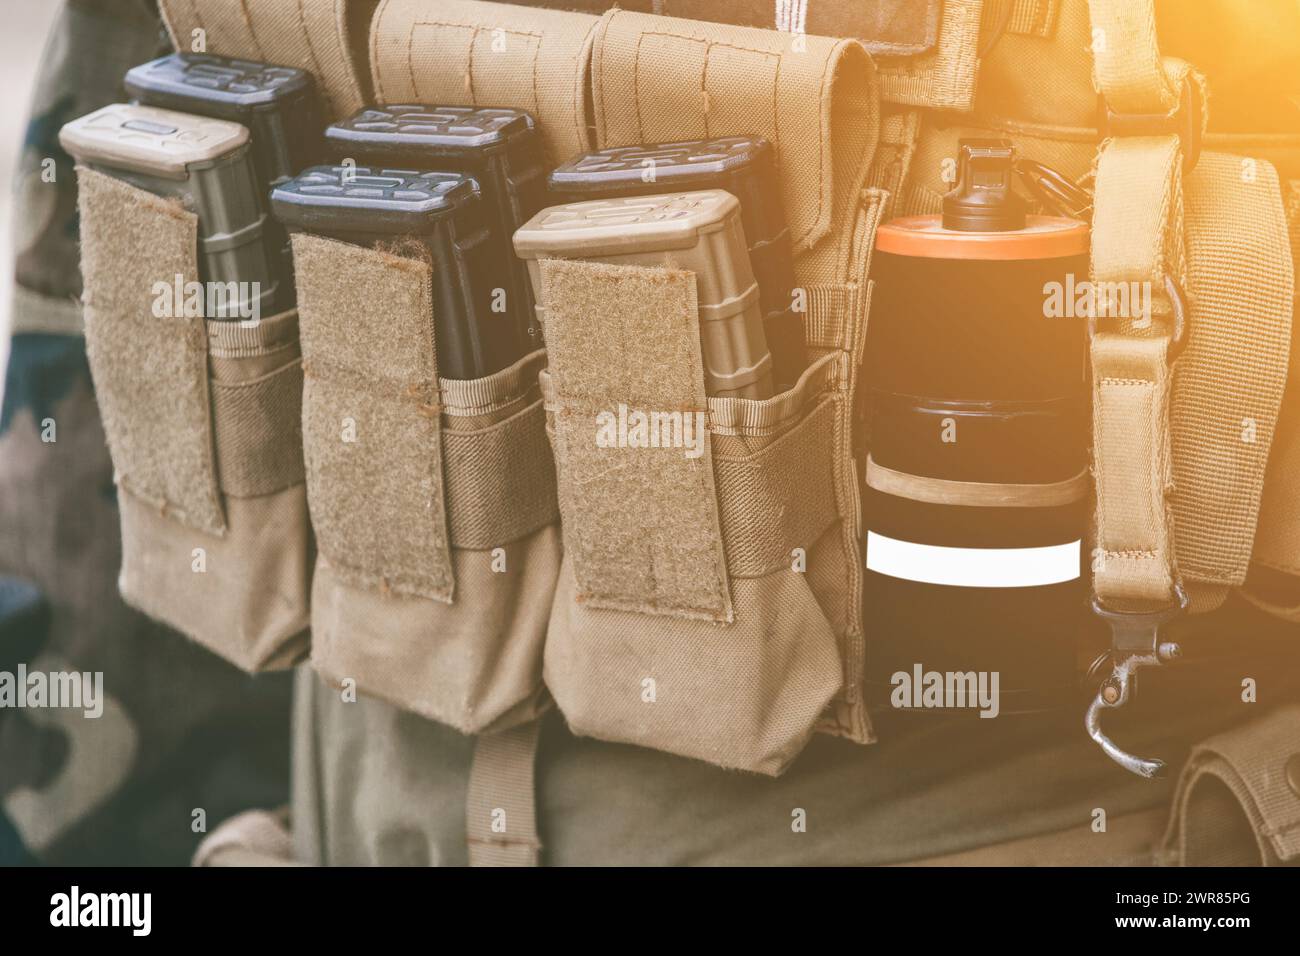 Army vest with a walkie-talkie charged collars stun grenades luminous sticks standing on a wooden box of ammunition. Stock Photo